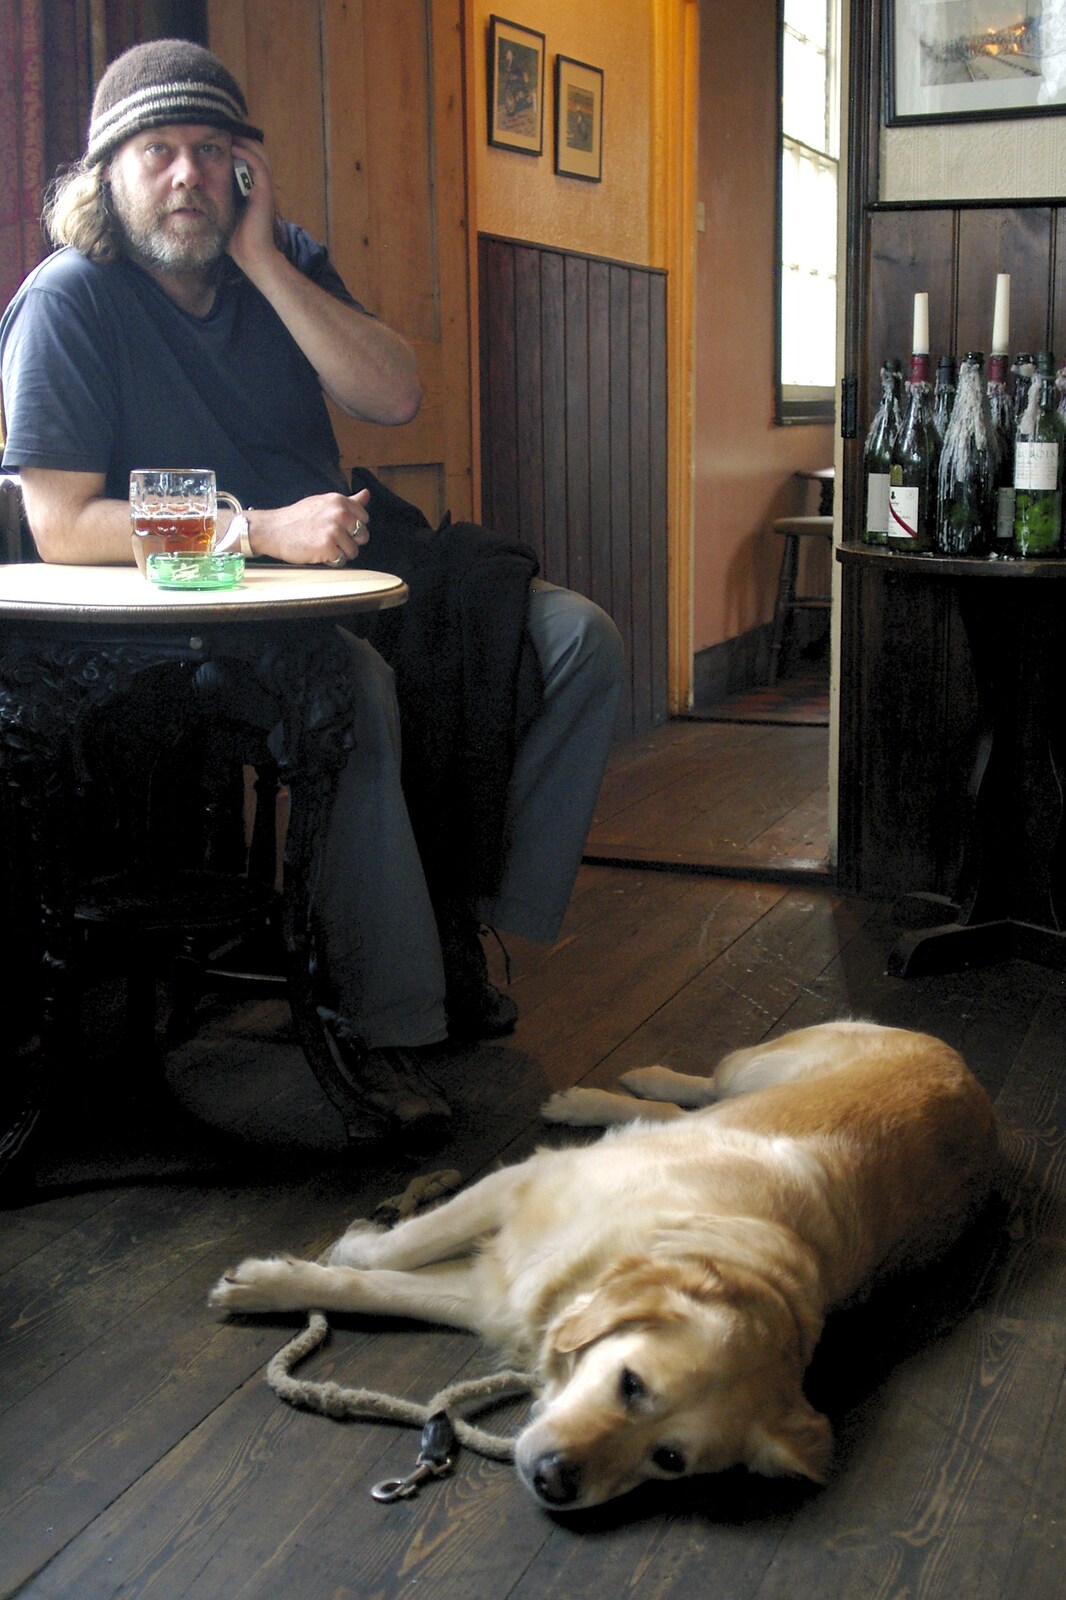 A pub dog dozes on the floor of the Station Hotel from The BSCC Easter Bike Ride, Framlingham, Suffolk - 26th March 2005